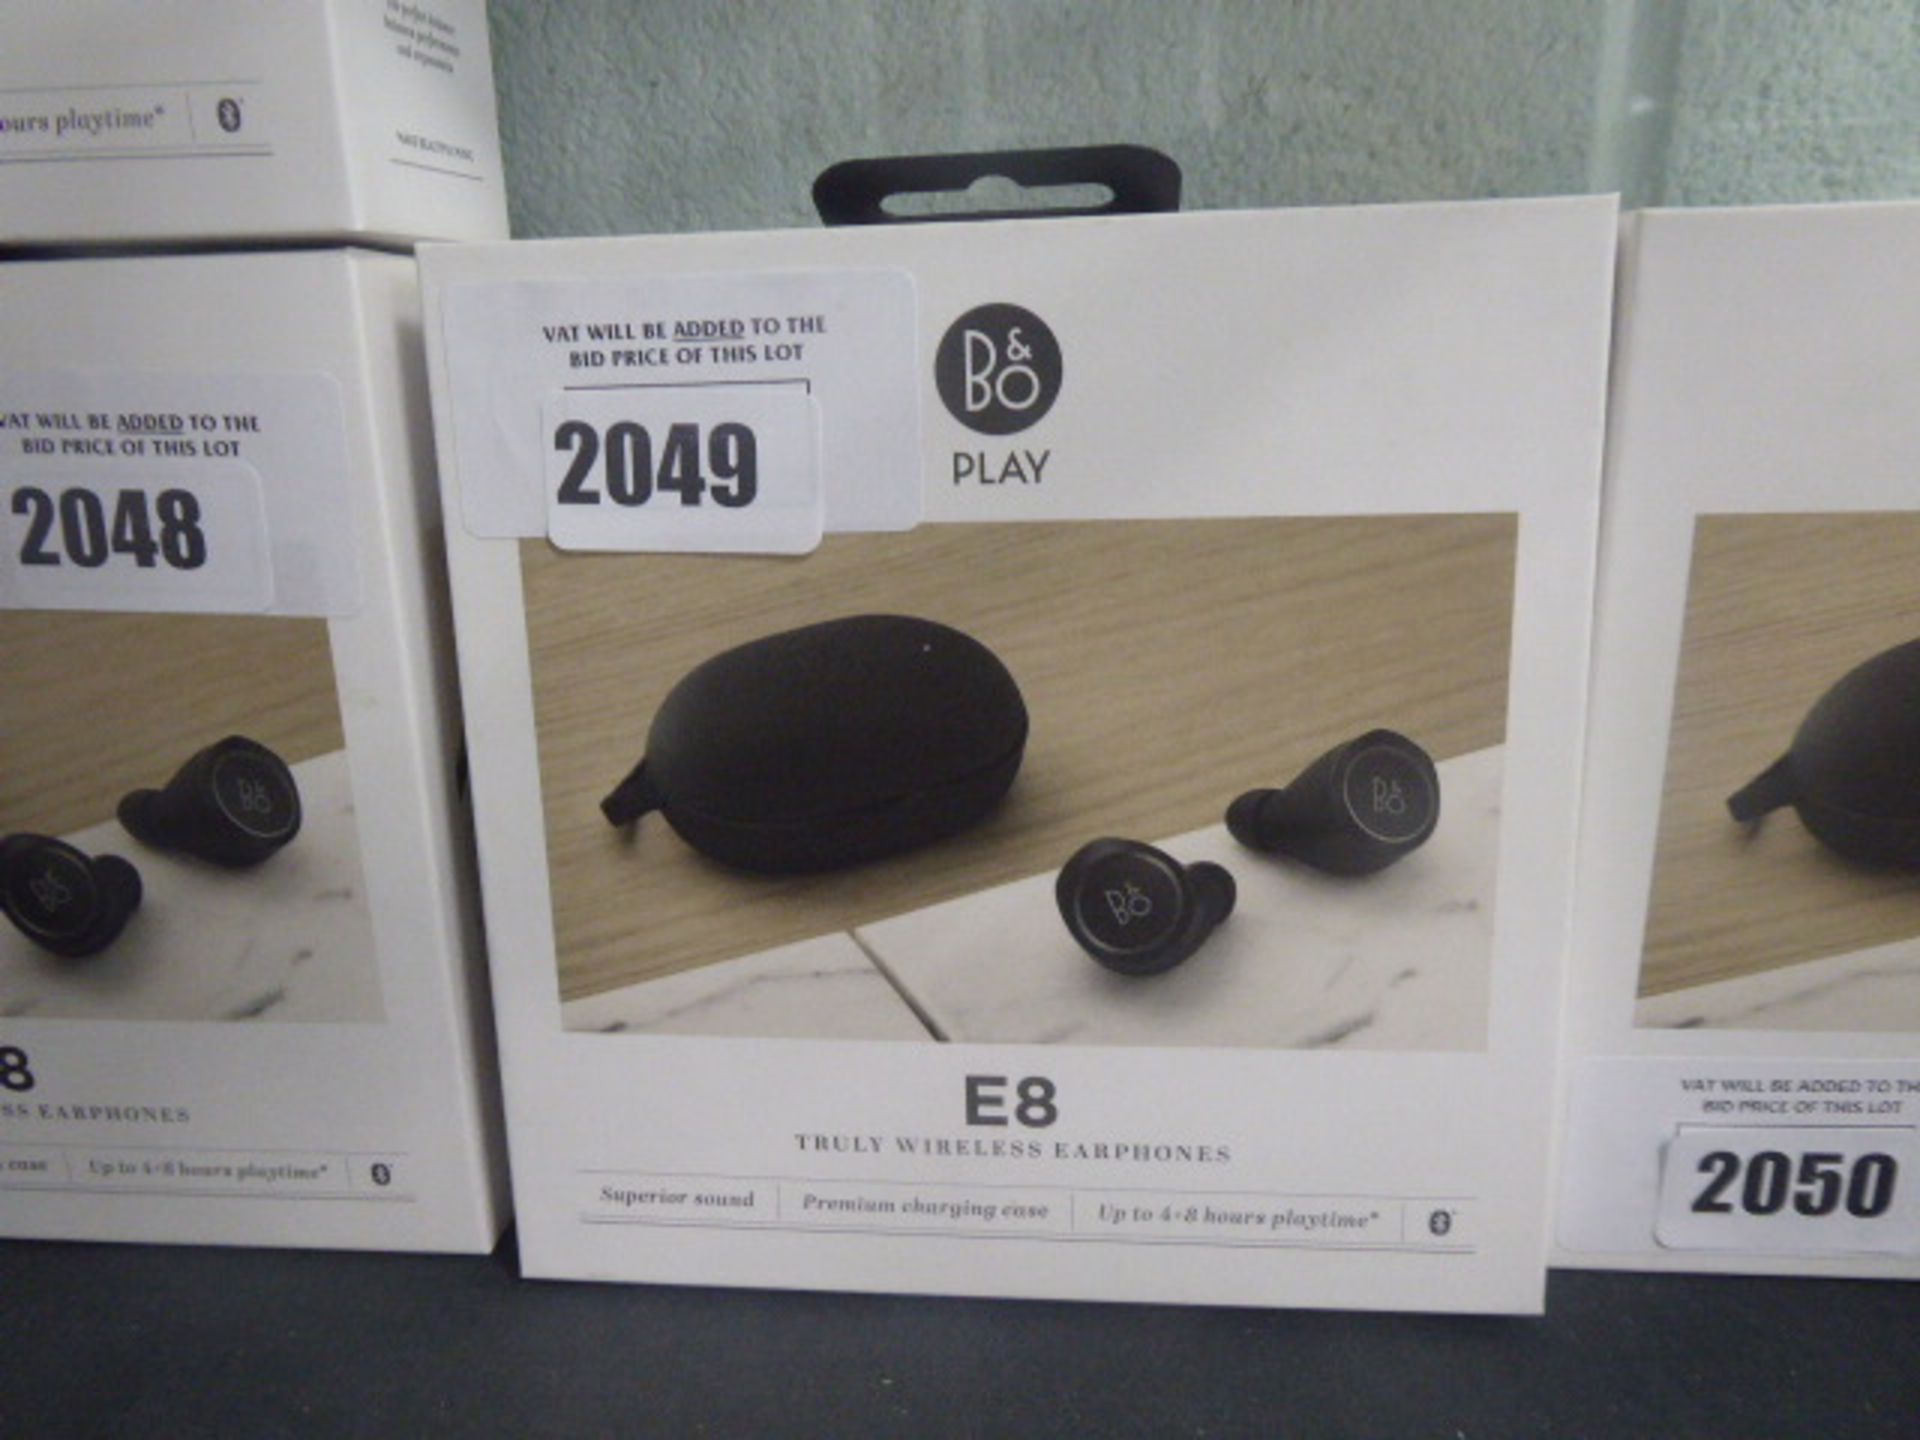 Bang & Olufsen Beoplay B8 wireless earphones with spare eartips, charging case and box